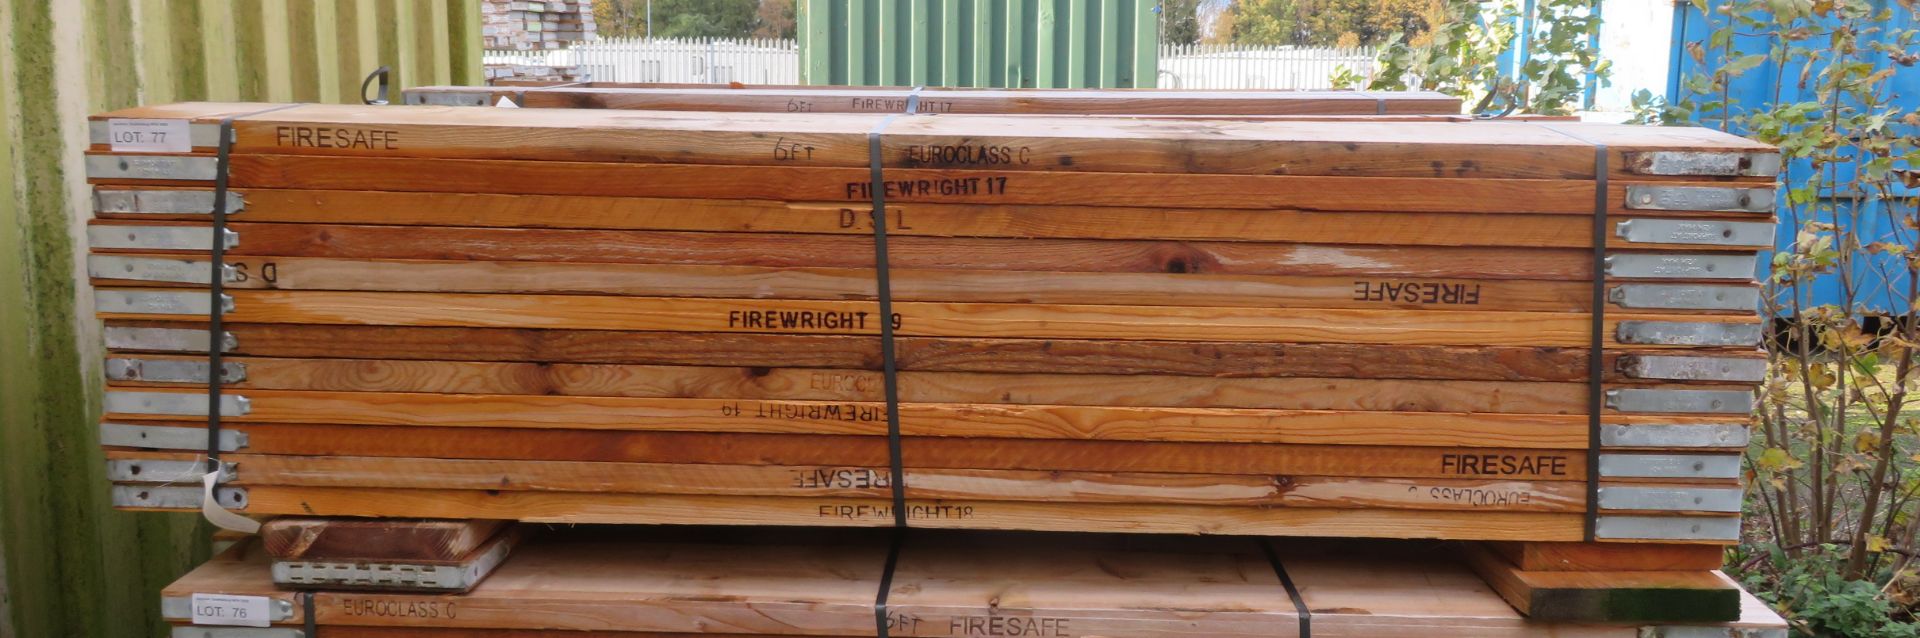 48x 6ft Wooden Scaffolding Boards. Please Note There Is A £10 Loading Charge On This Lot.